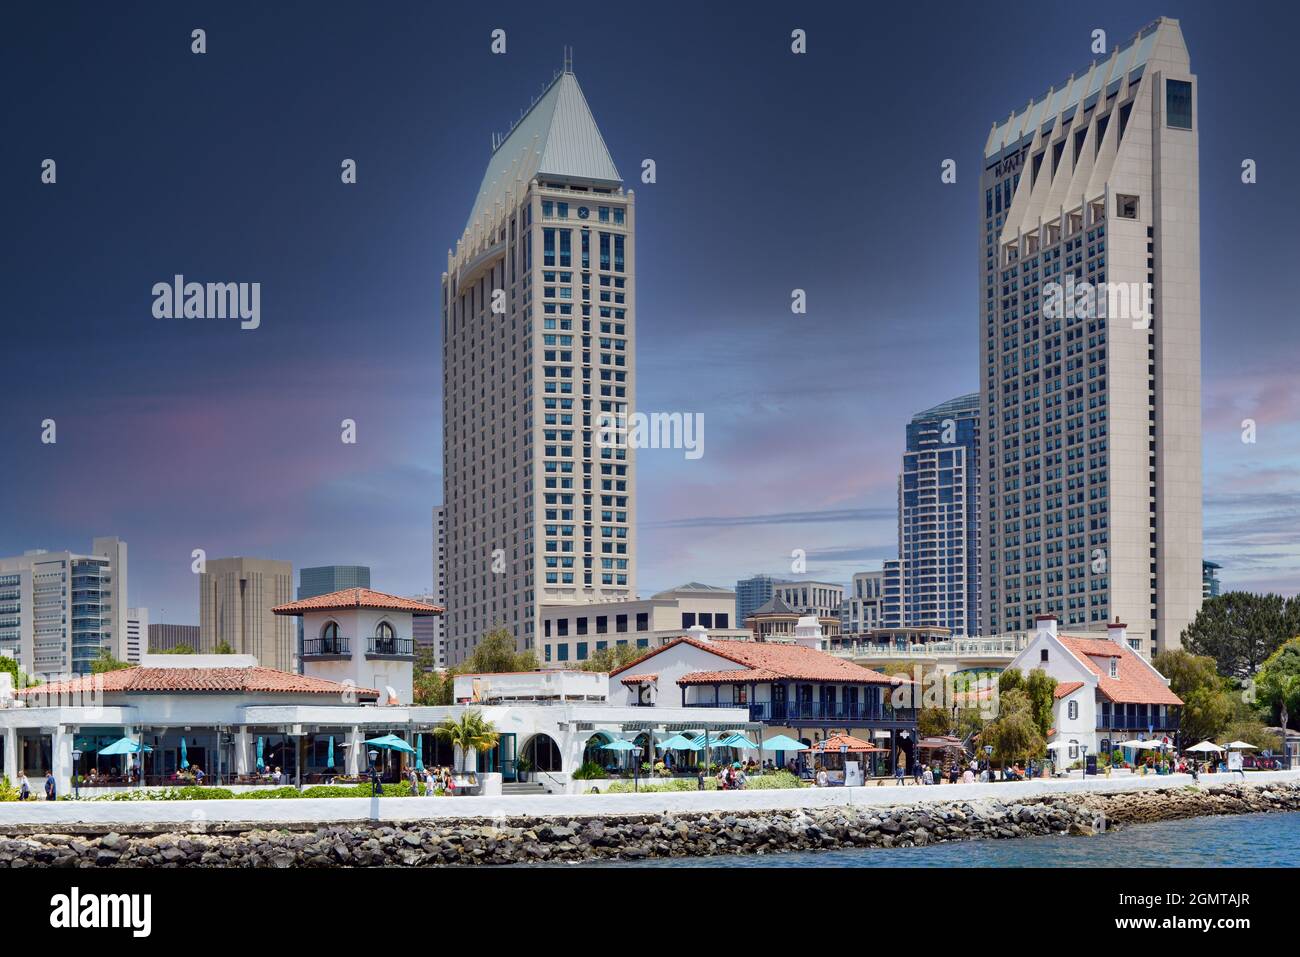 The Edgewater Grill restaurant at Seaport Village, dominated by looming high-rise Manchester Grand Hyatt hotel on the bay in San Diego, CA Stock Photo